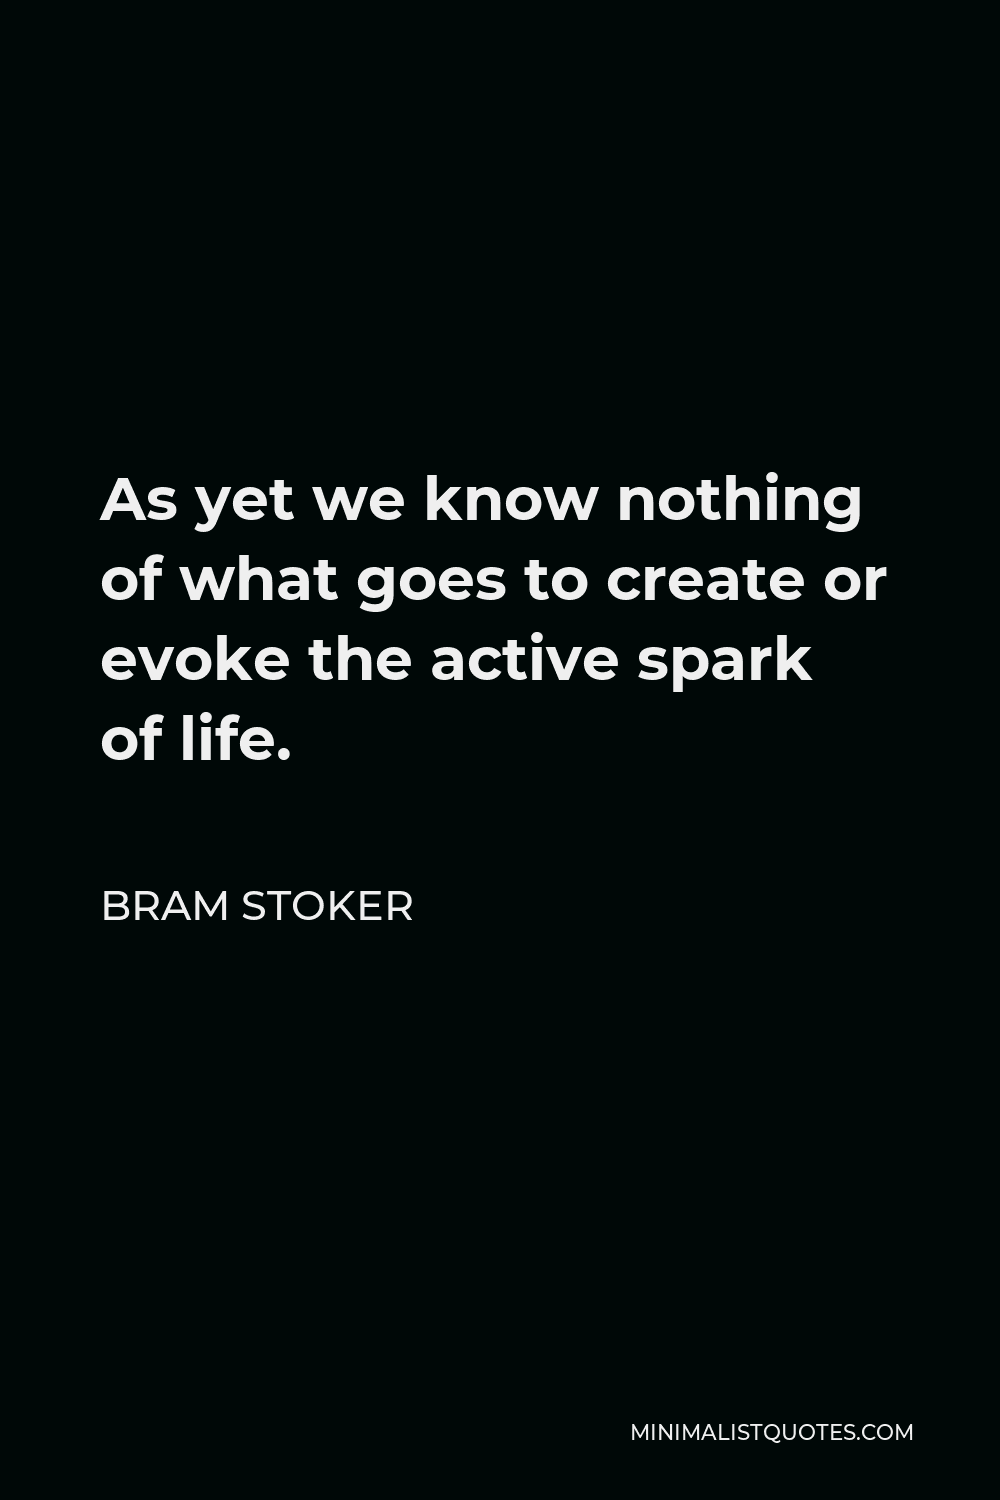 Bram Stoker Quote - As yet we know nothing of what goes to create or evoke the active spark of life.